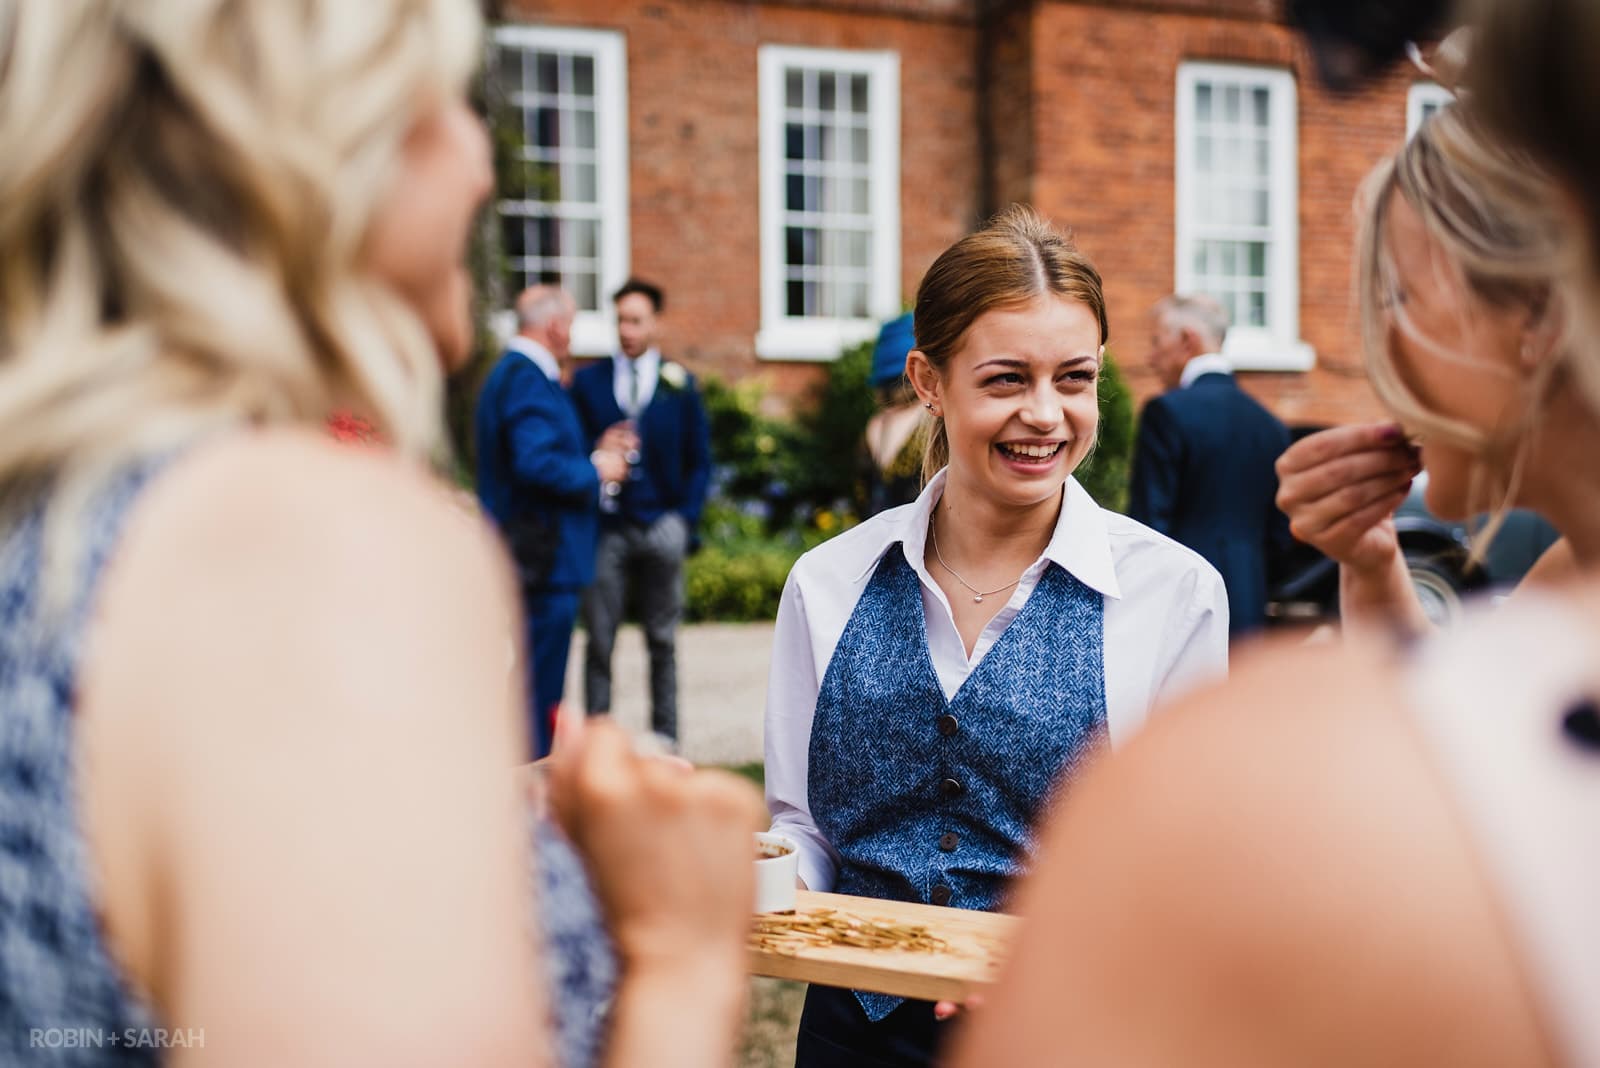 Guests drink and chat during wedding reception